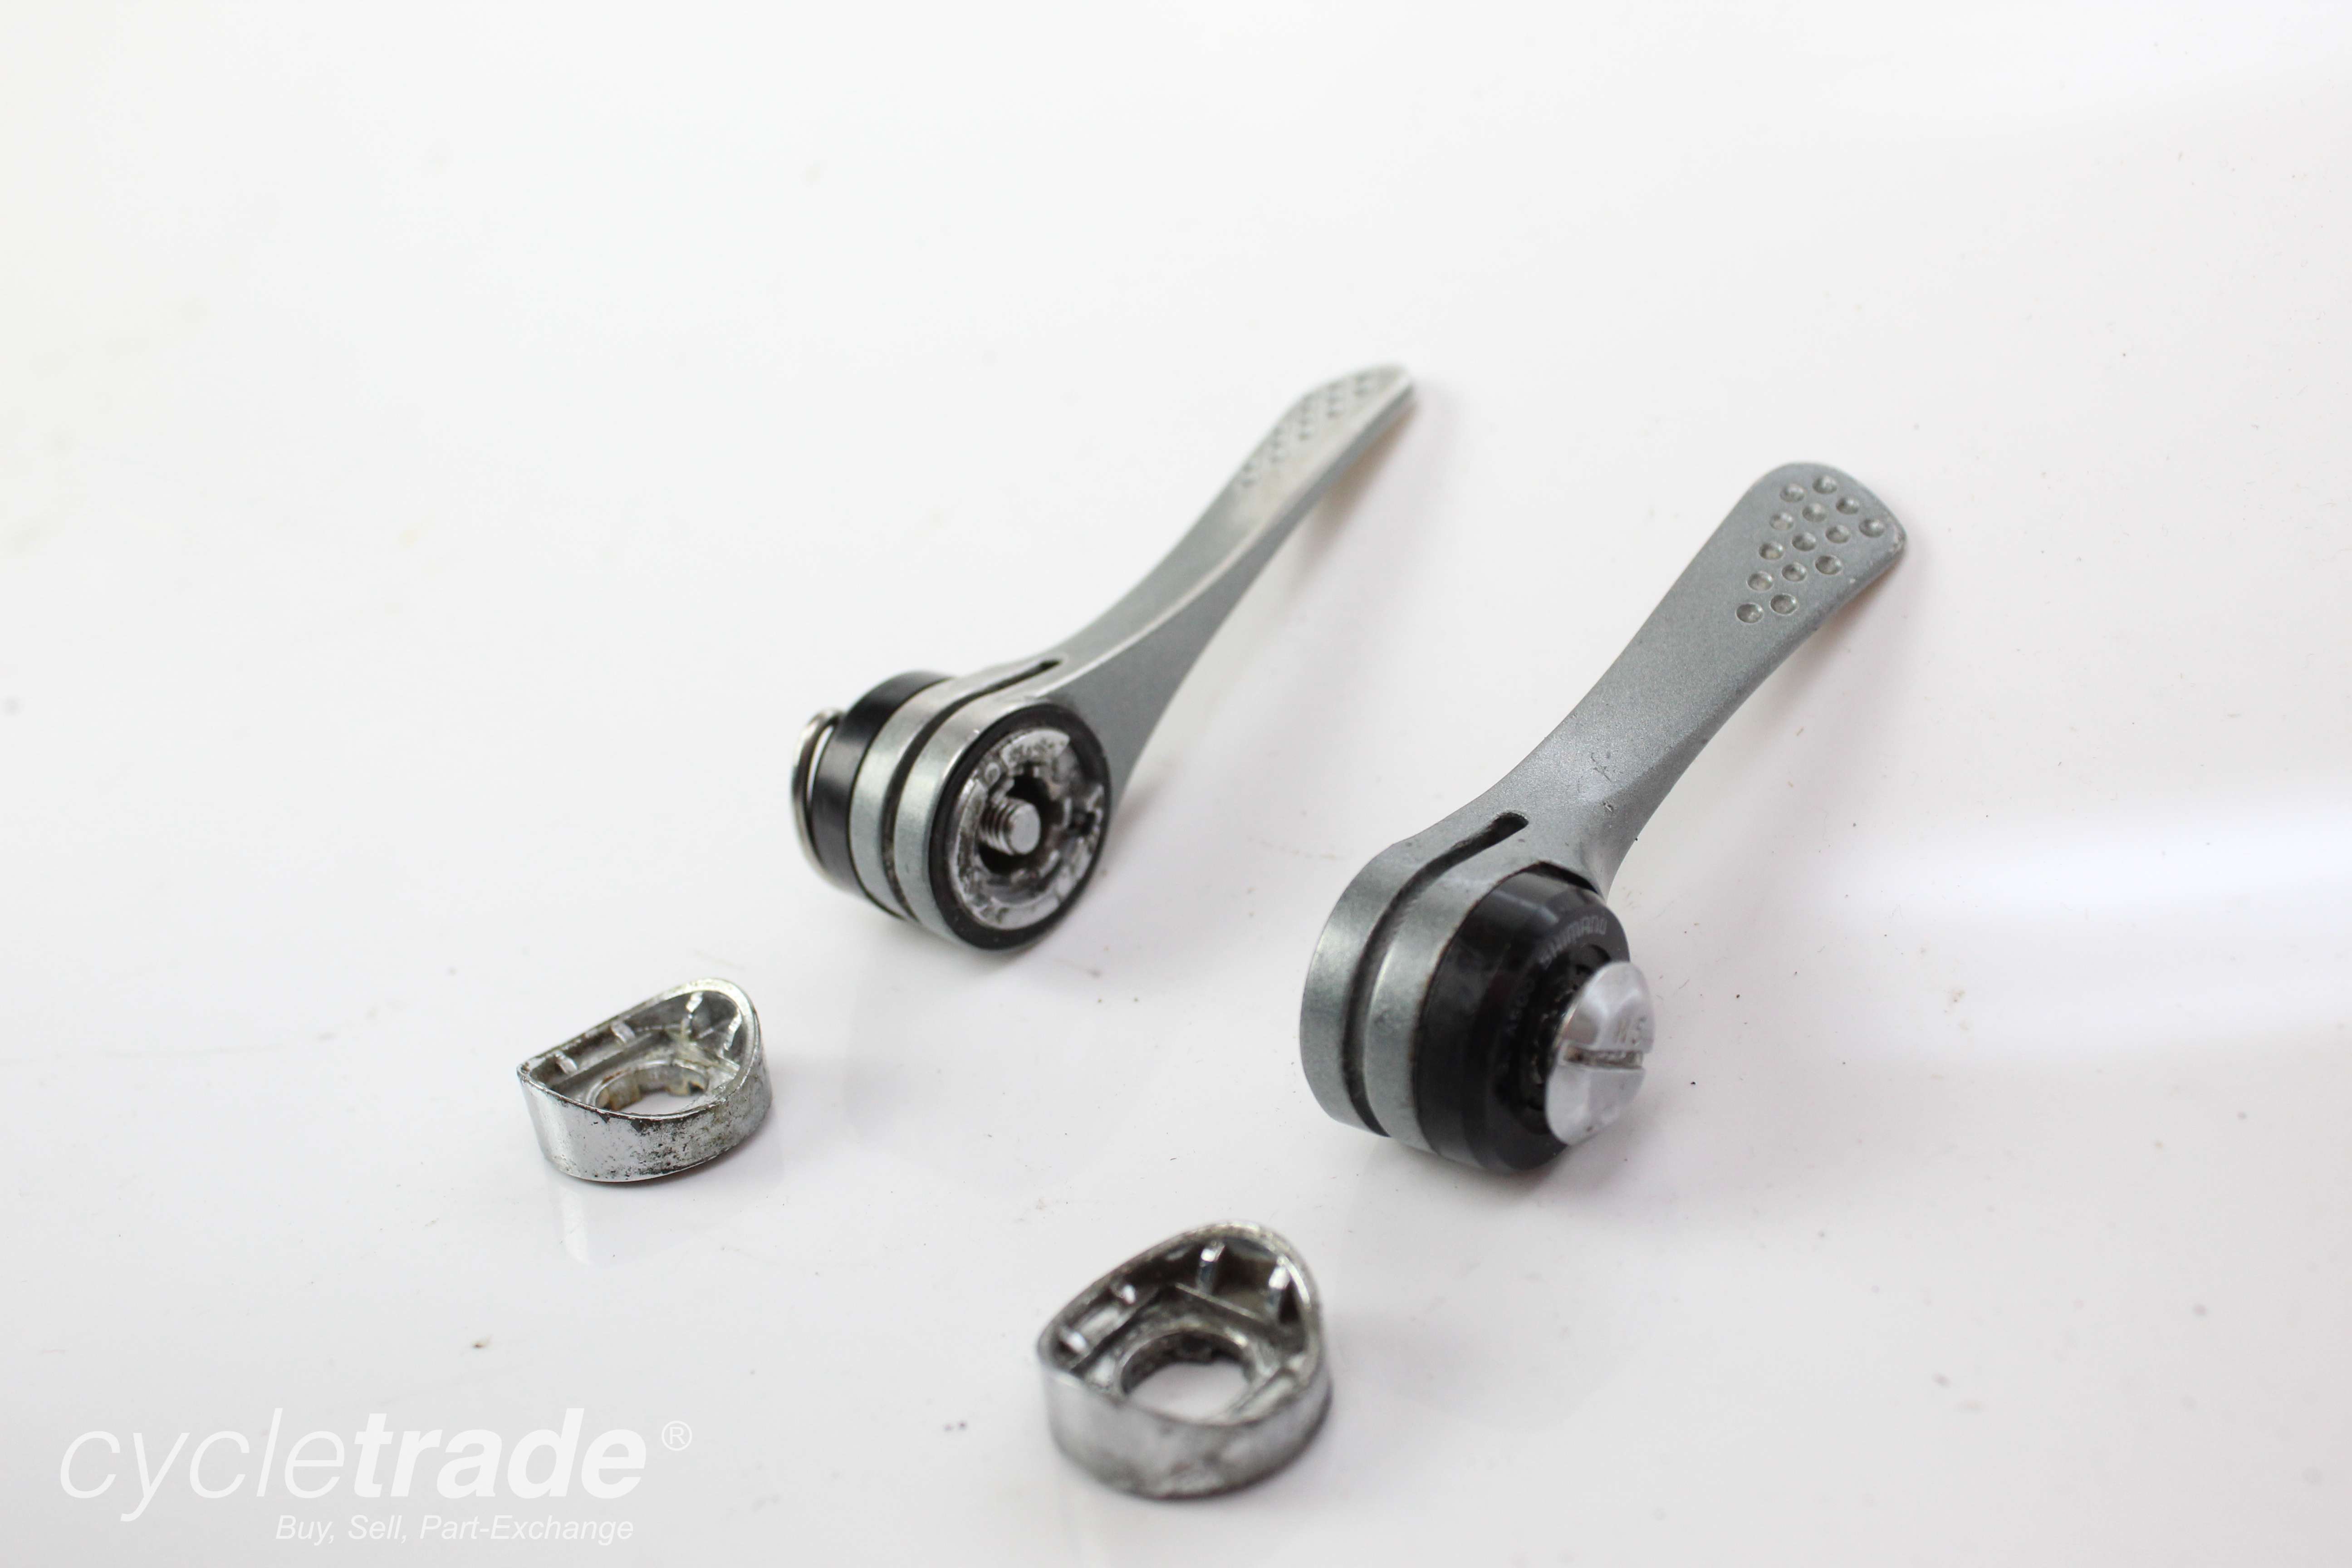 Downtube Friction/SIS Shifters- Shimano SL A500 7 Speed Braze On - Grade B